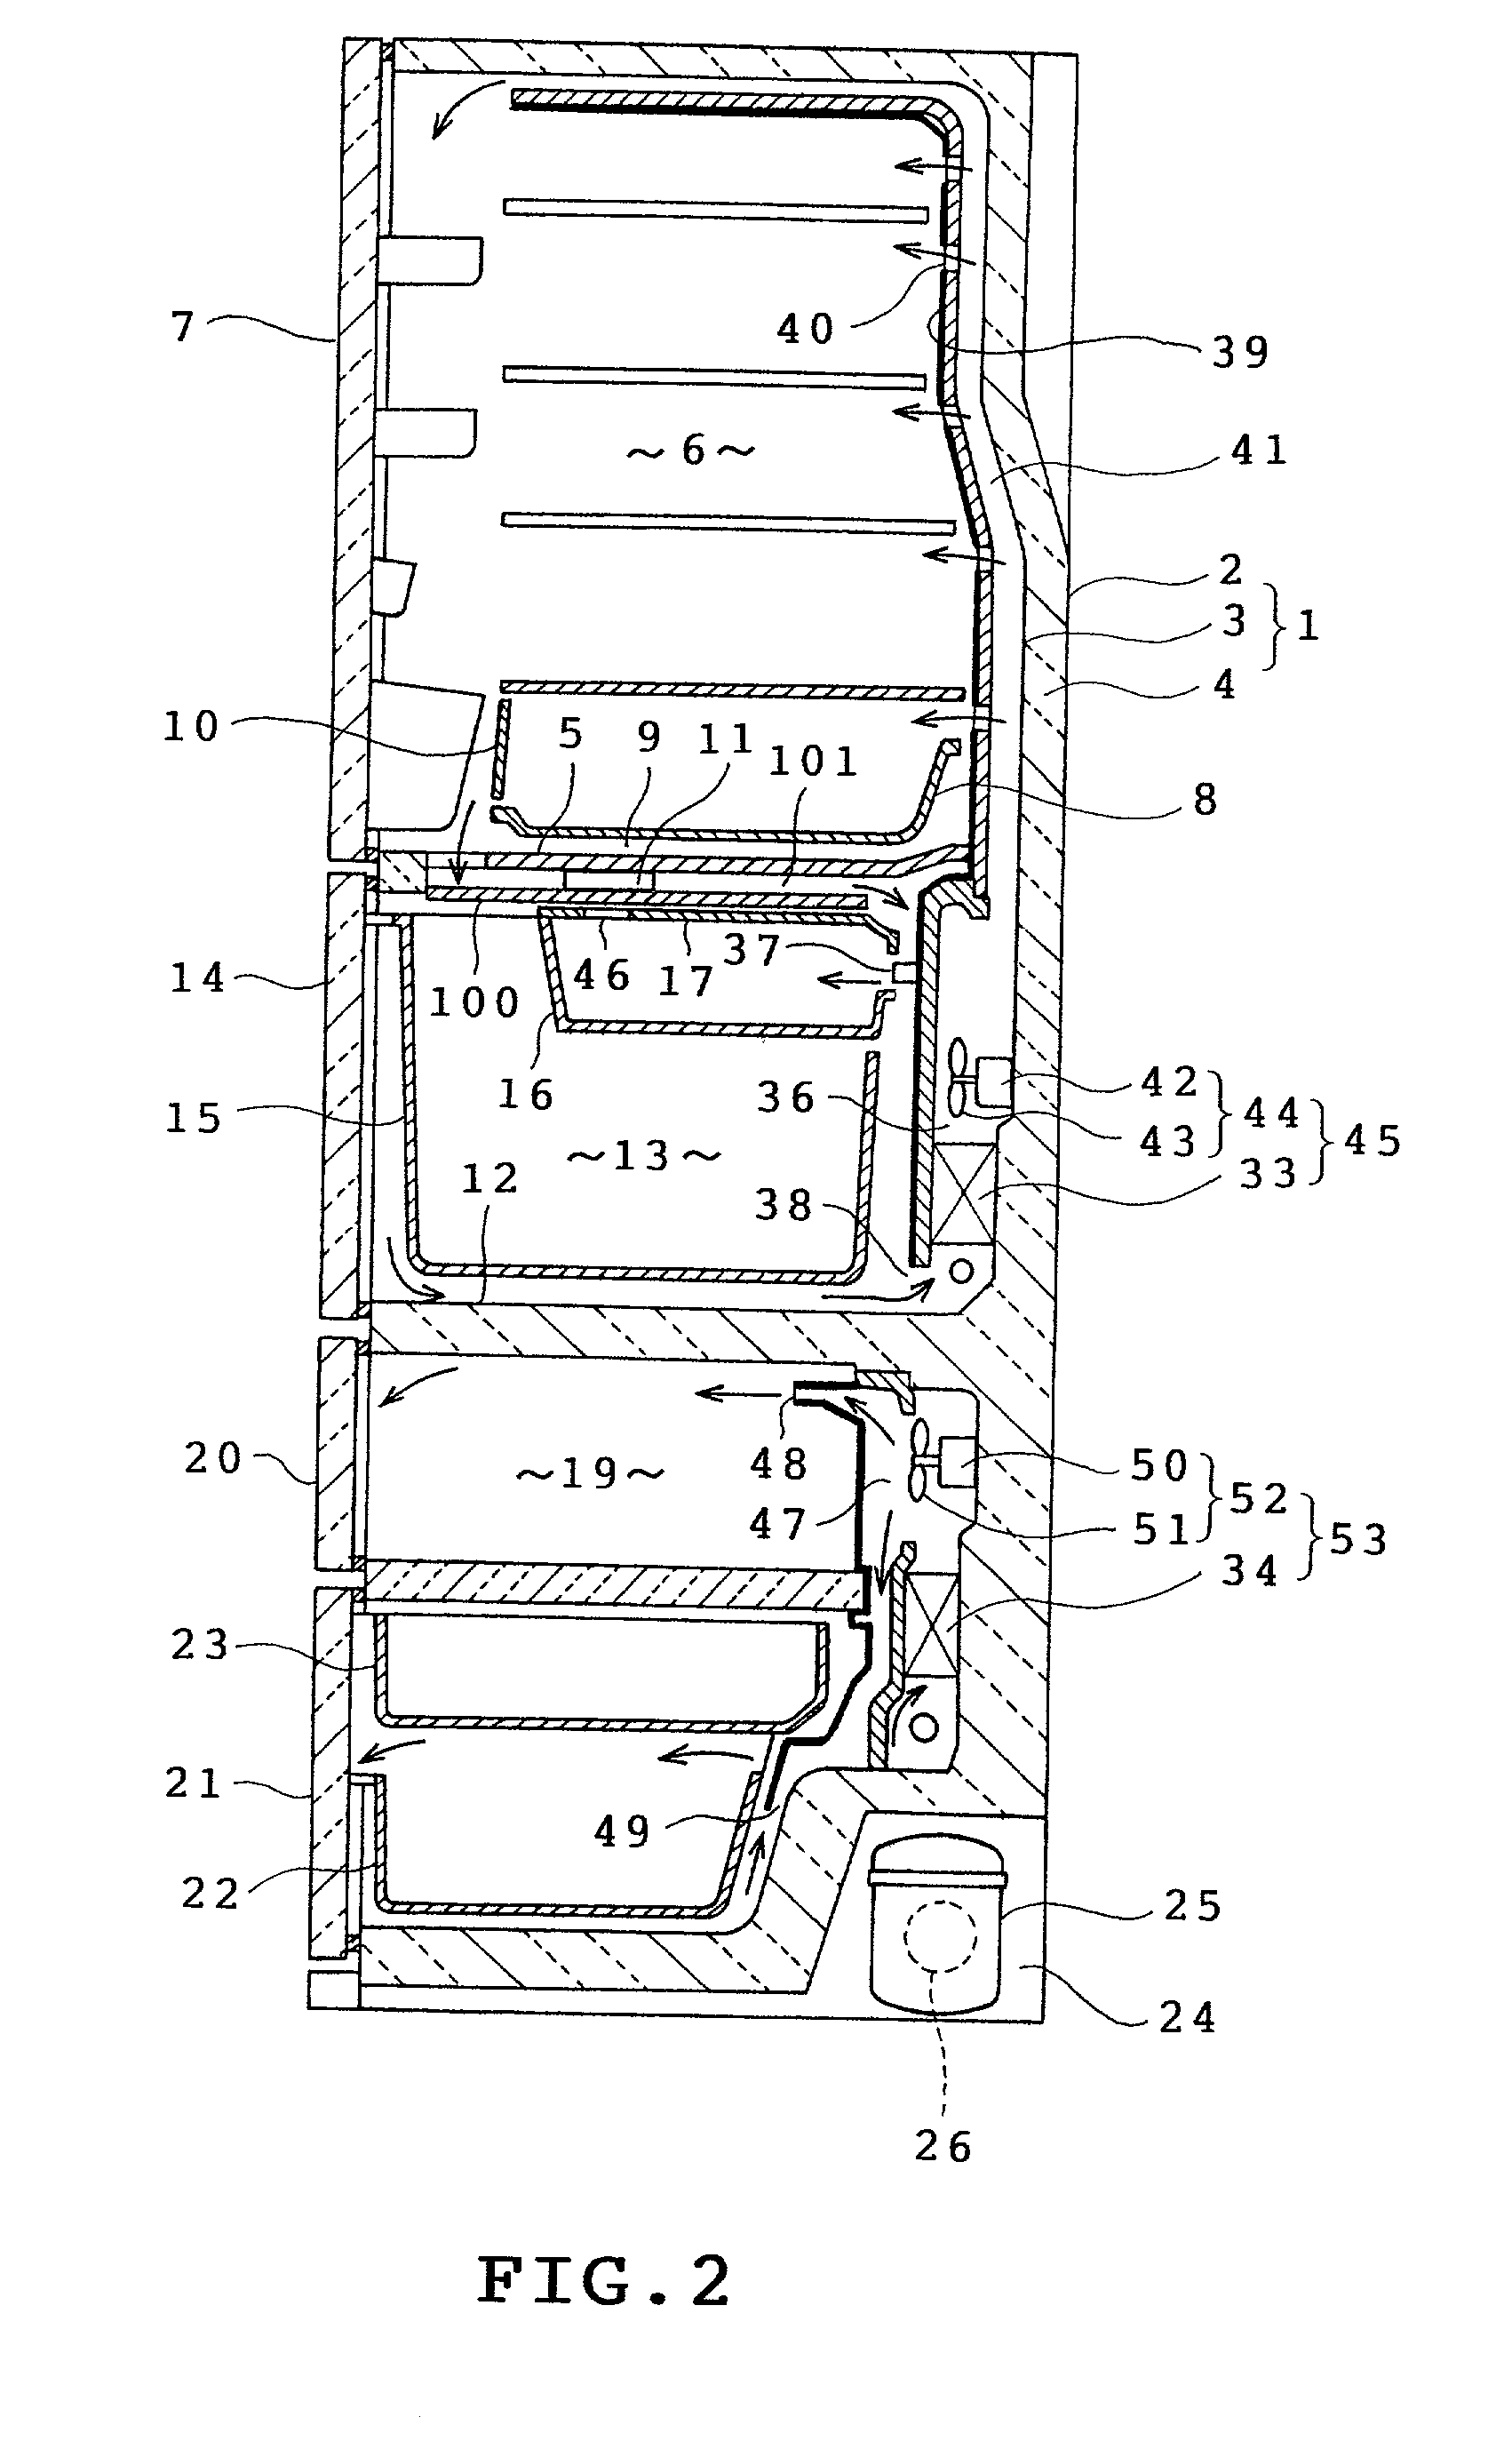 Refrigerator and deodorizer producing ozone by high-voltage discharge